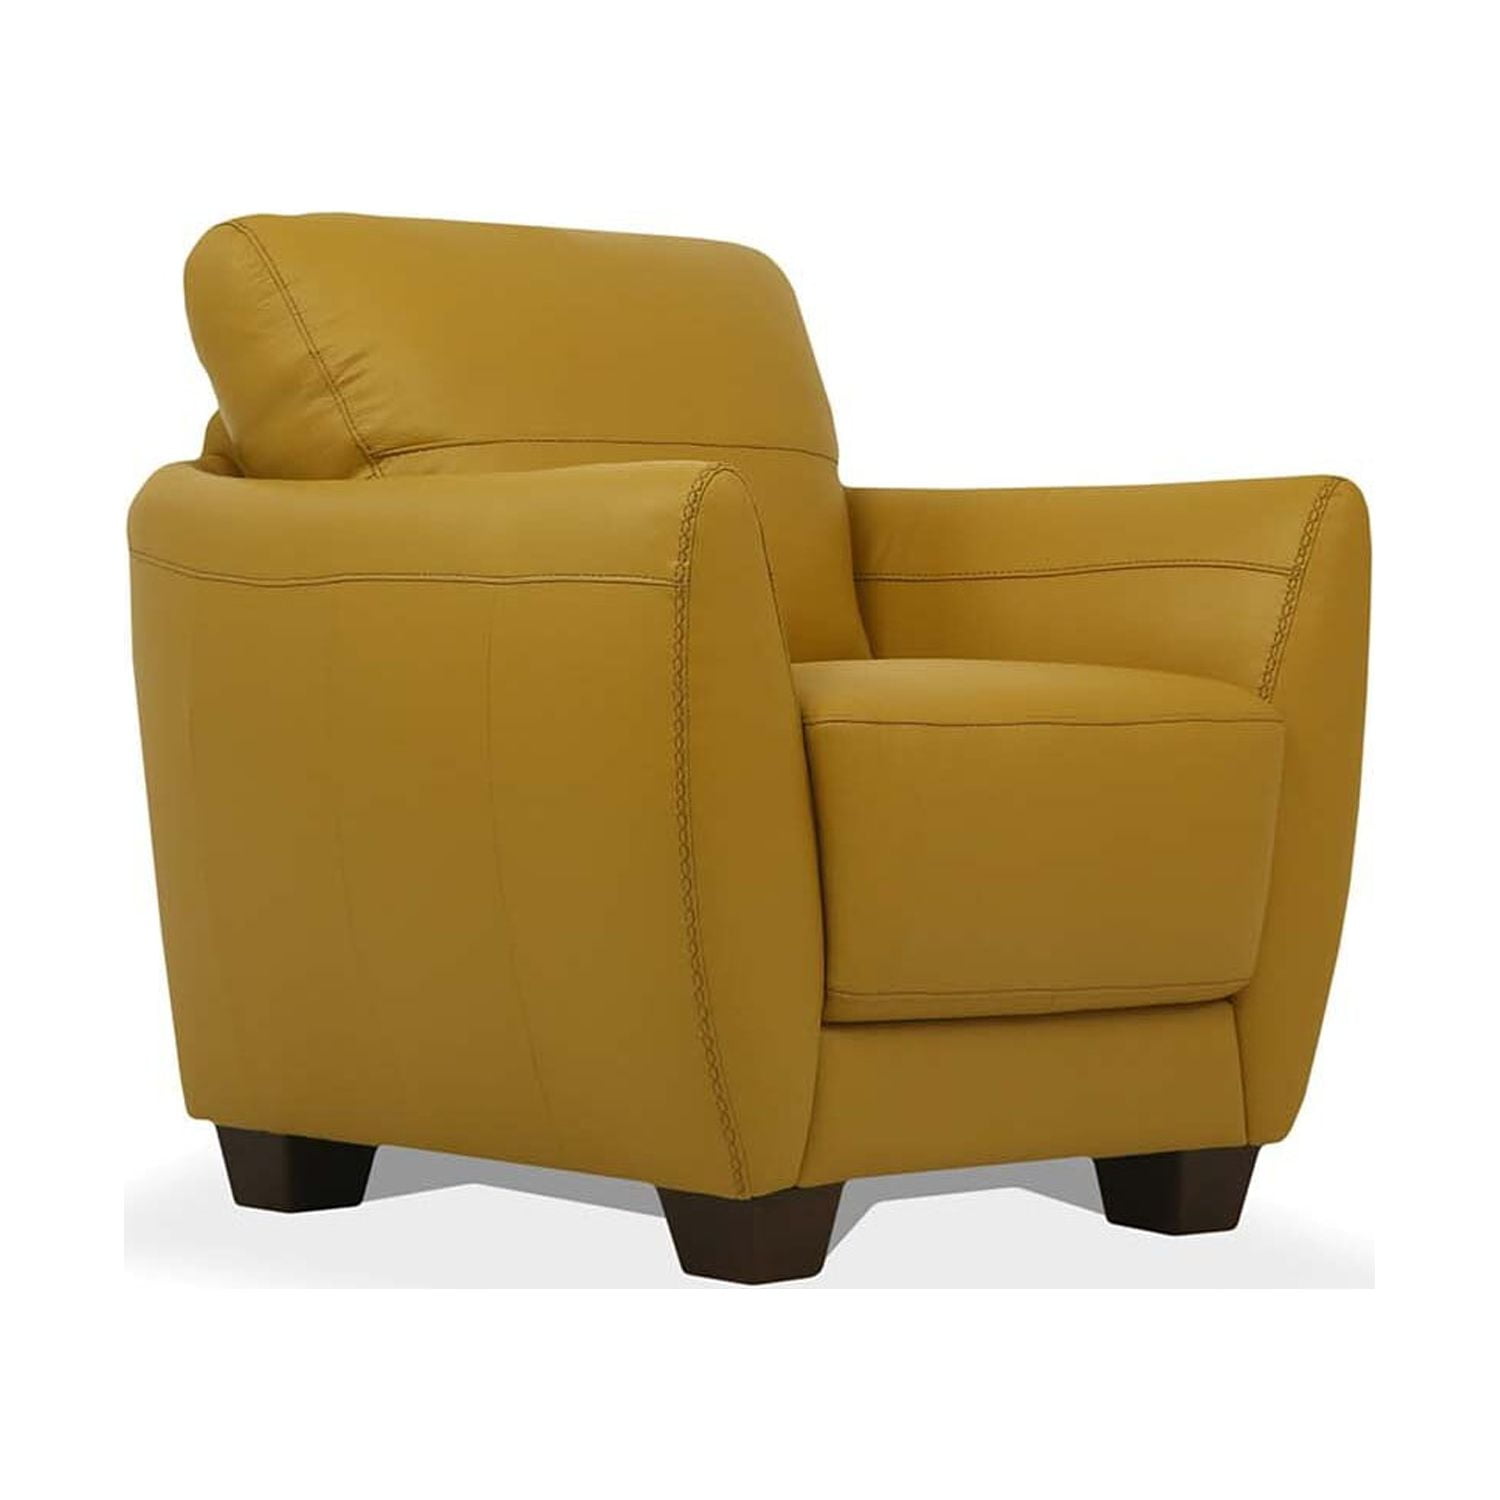 Picture of Acme Furniture 54947 33 x 36 x 31 in. Valeria Accent Chair, Mustard Leather